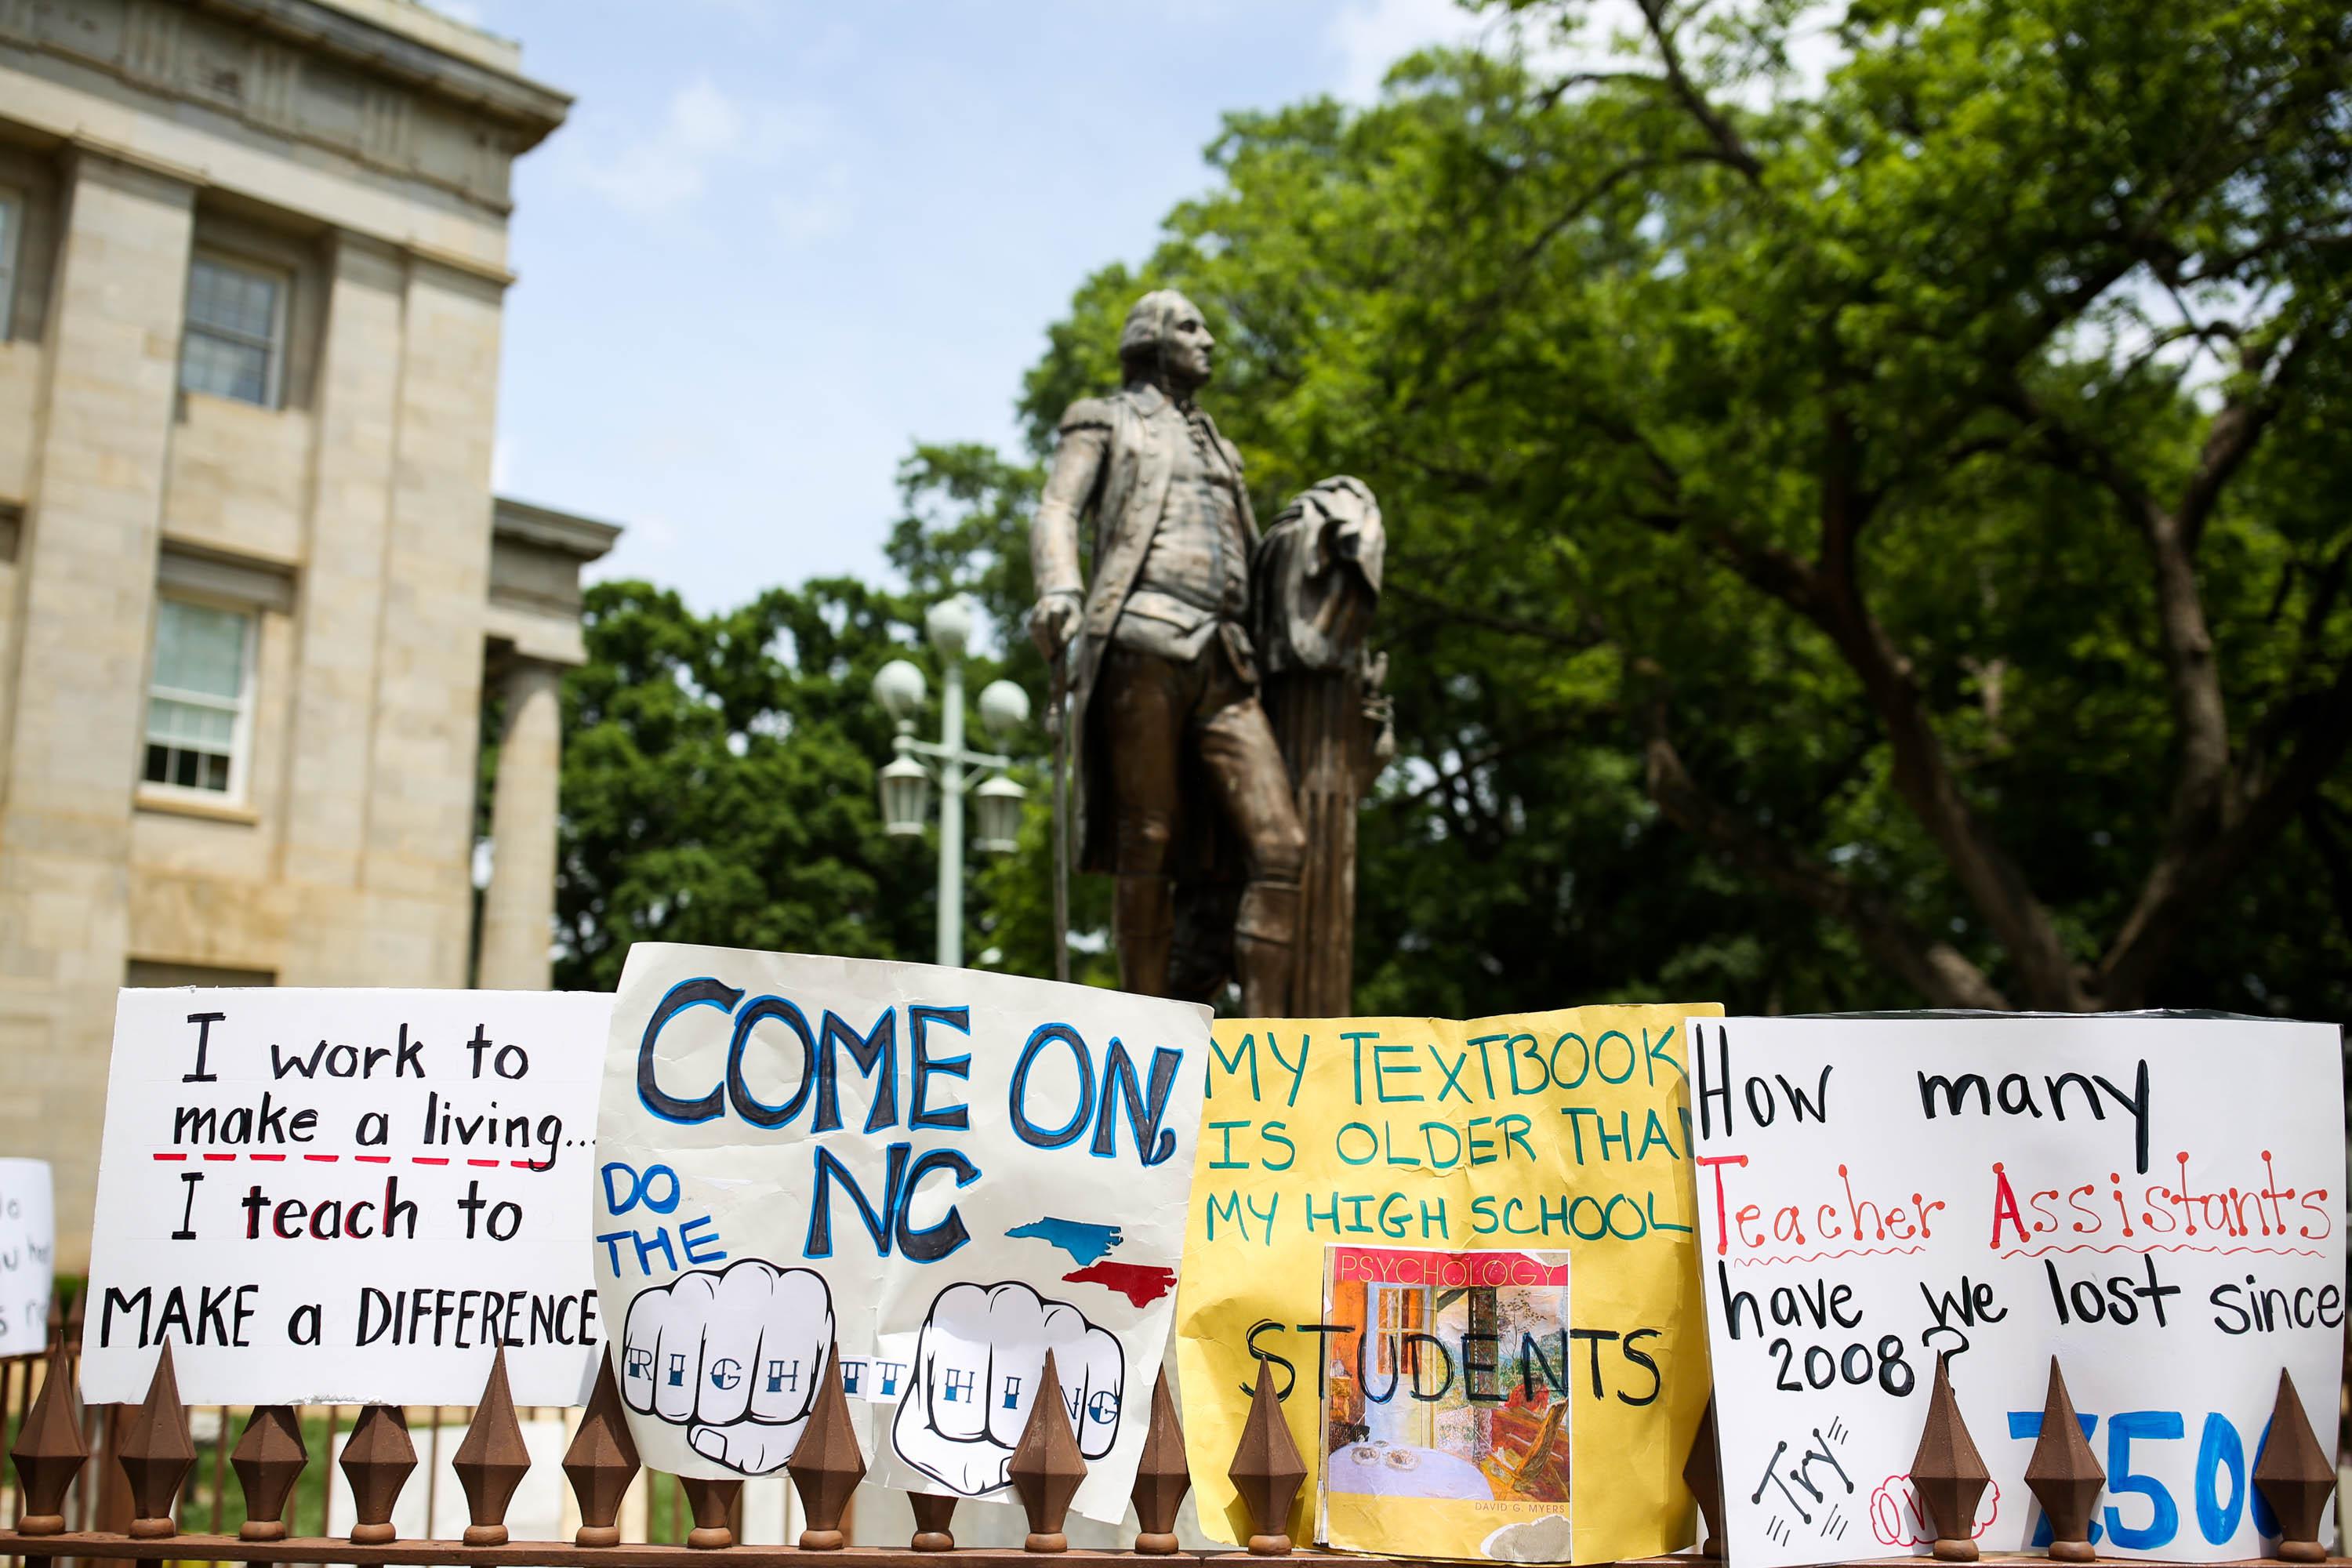 Protest signs lean against the state capitol building in Raleigh, North Carolina.